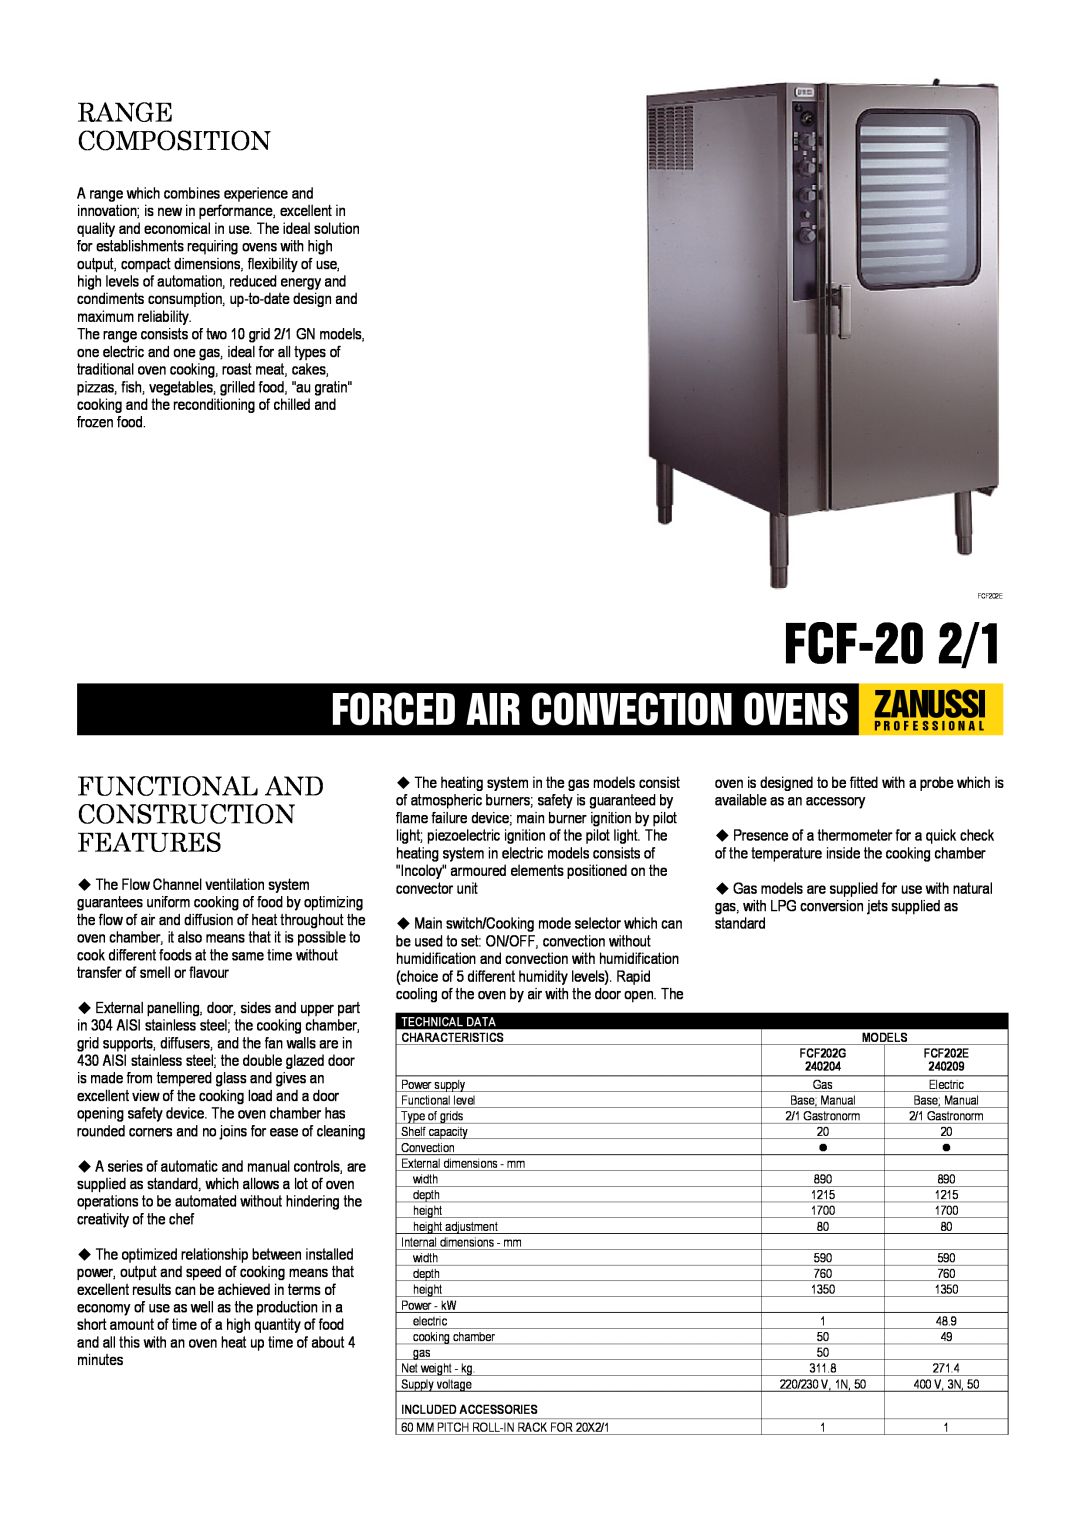 Zanussi 240209, 240204 dimensions FCF-202/1, Range Composition, Functional And Construction Features 